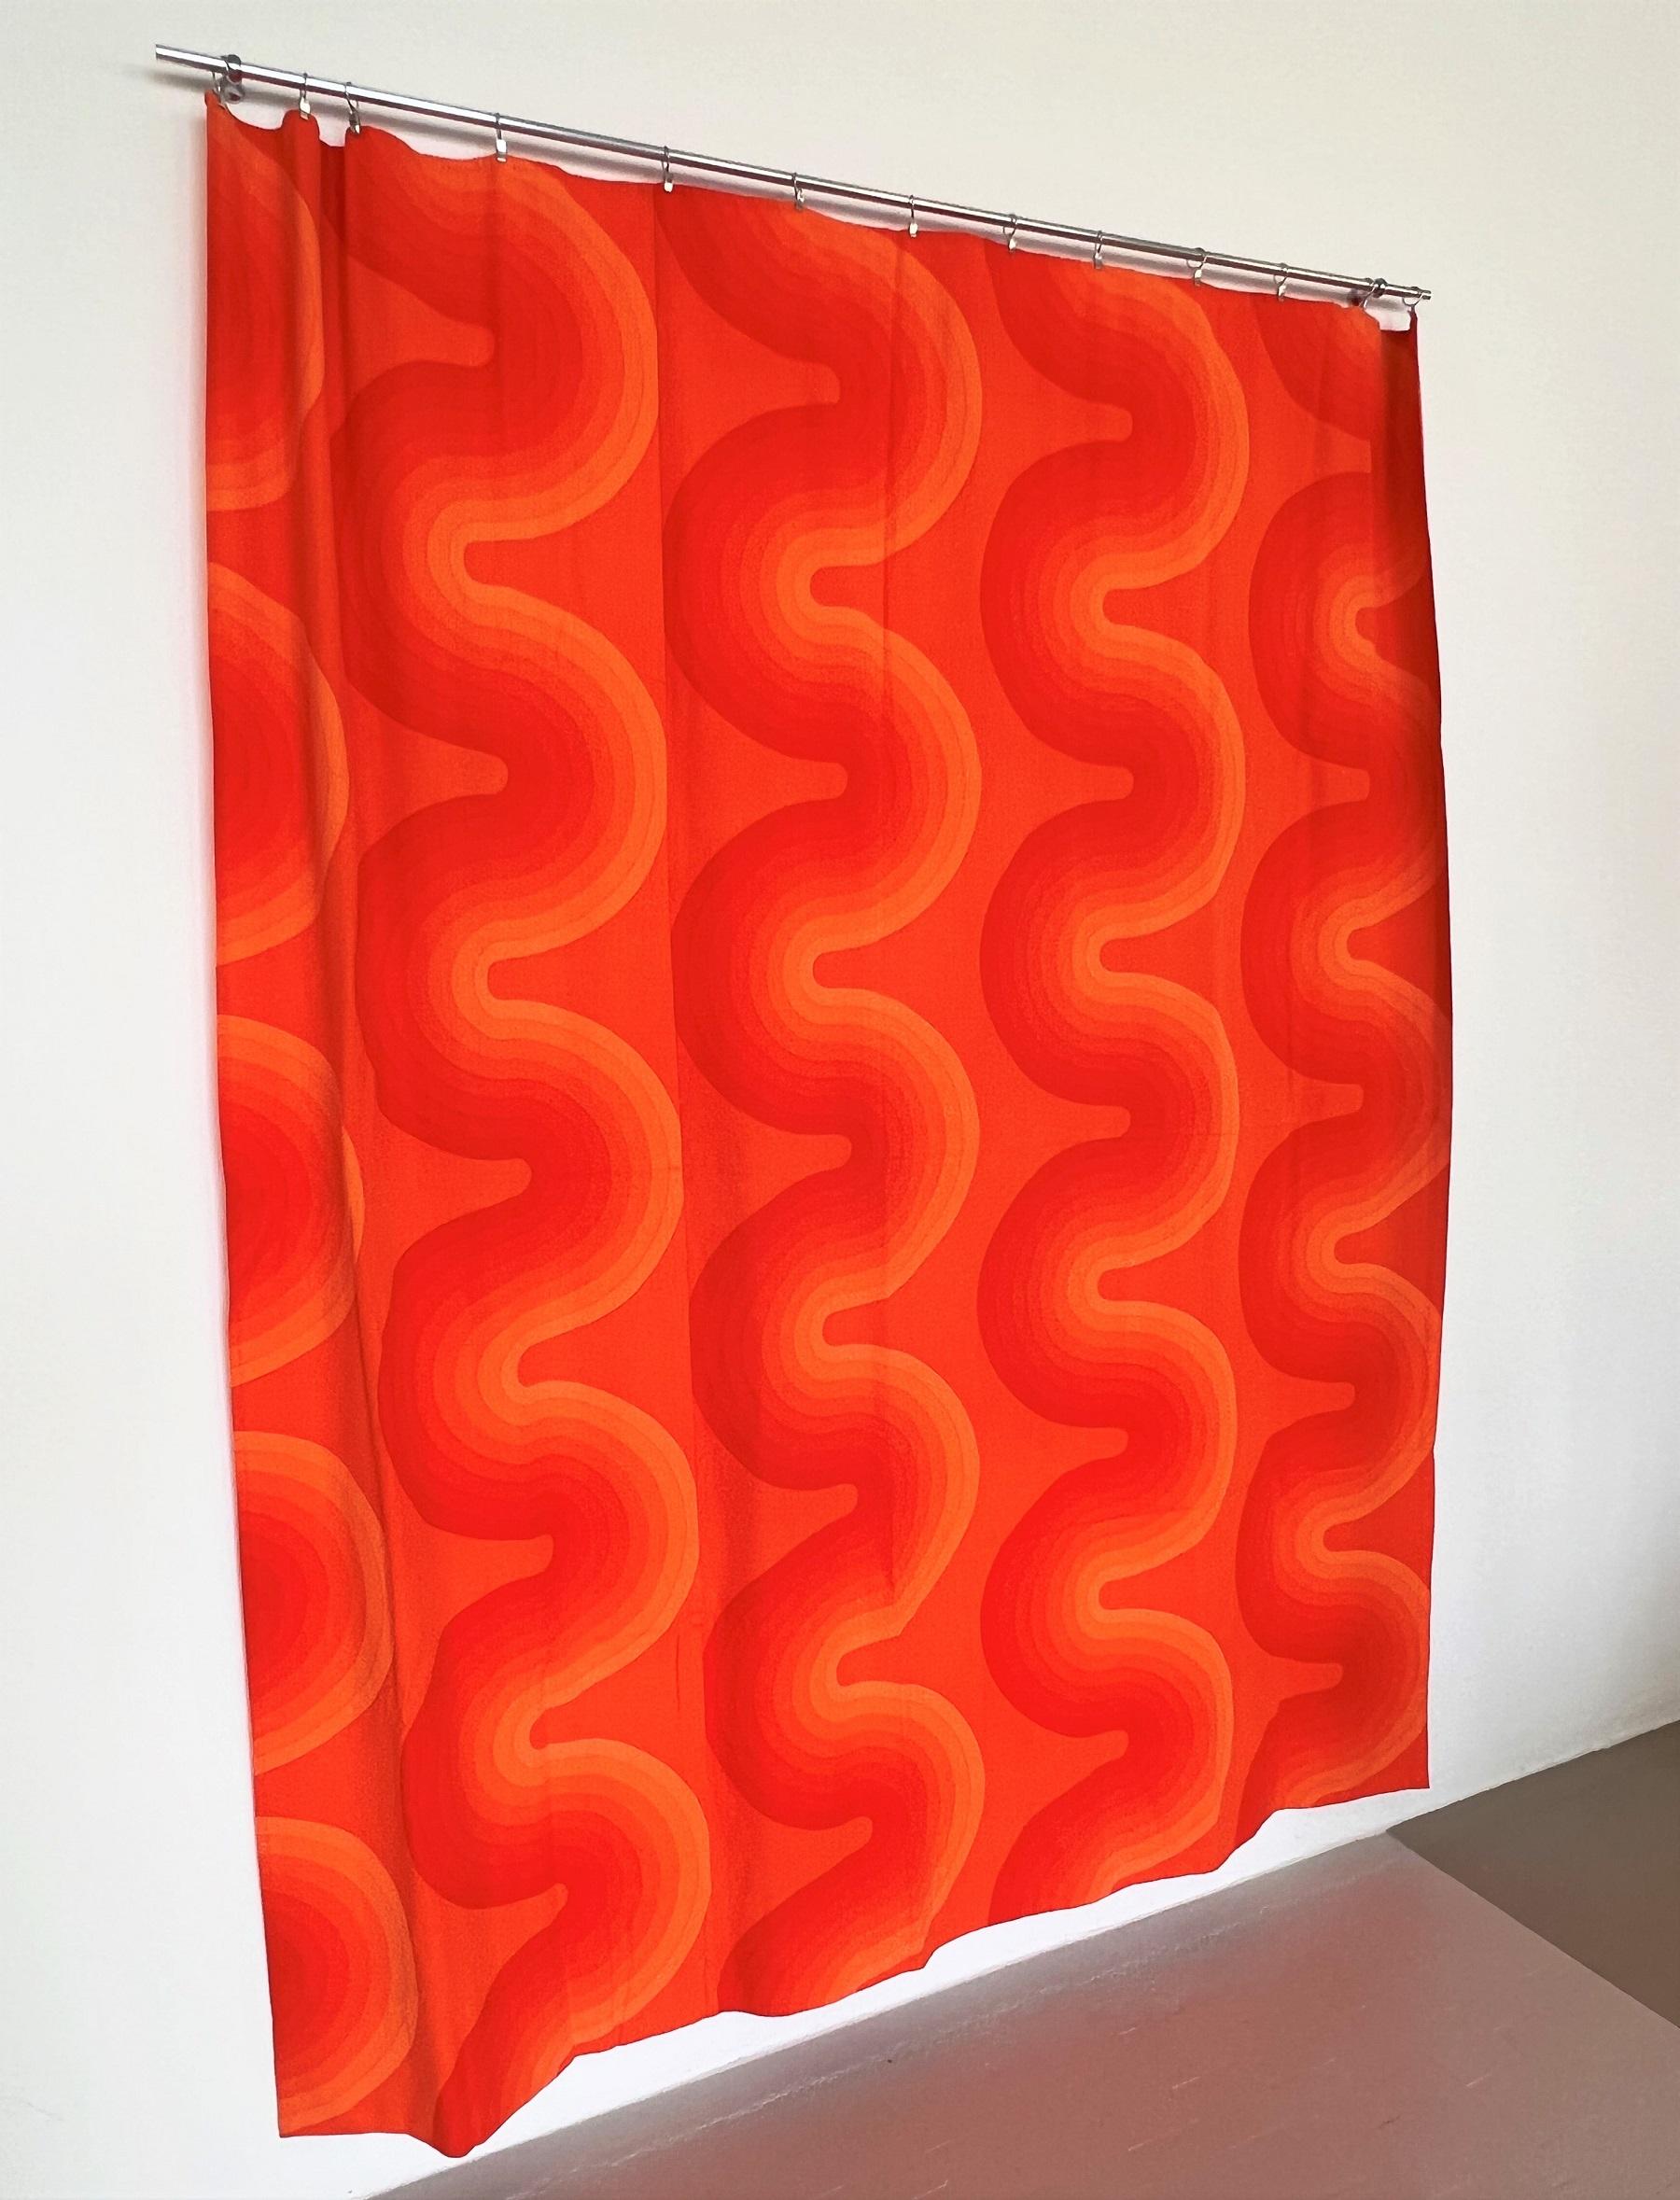 Scandinavian Modern Verner Panton Original Fabric Panel Tapestry for Mira-X Collection, 1970s For Sale